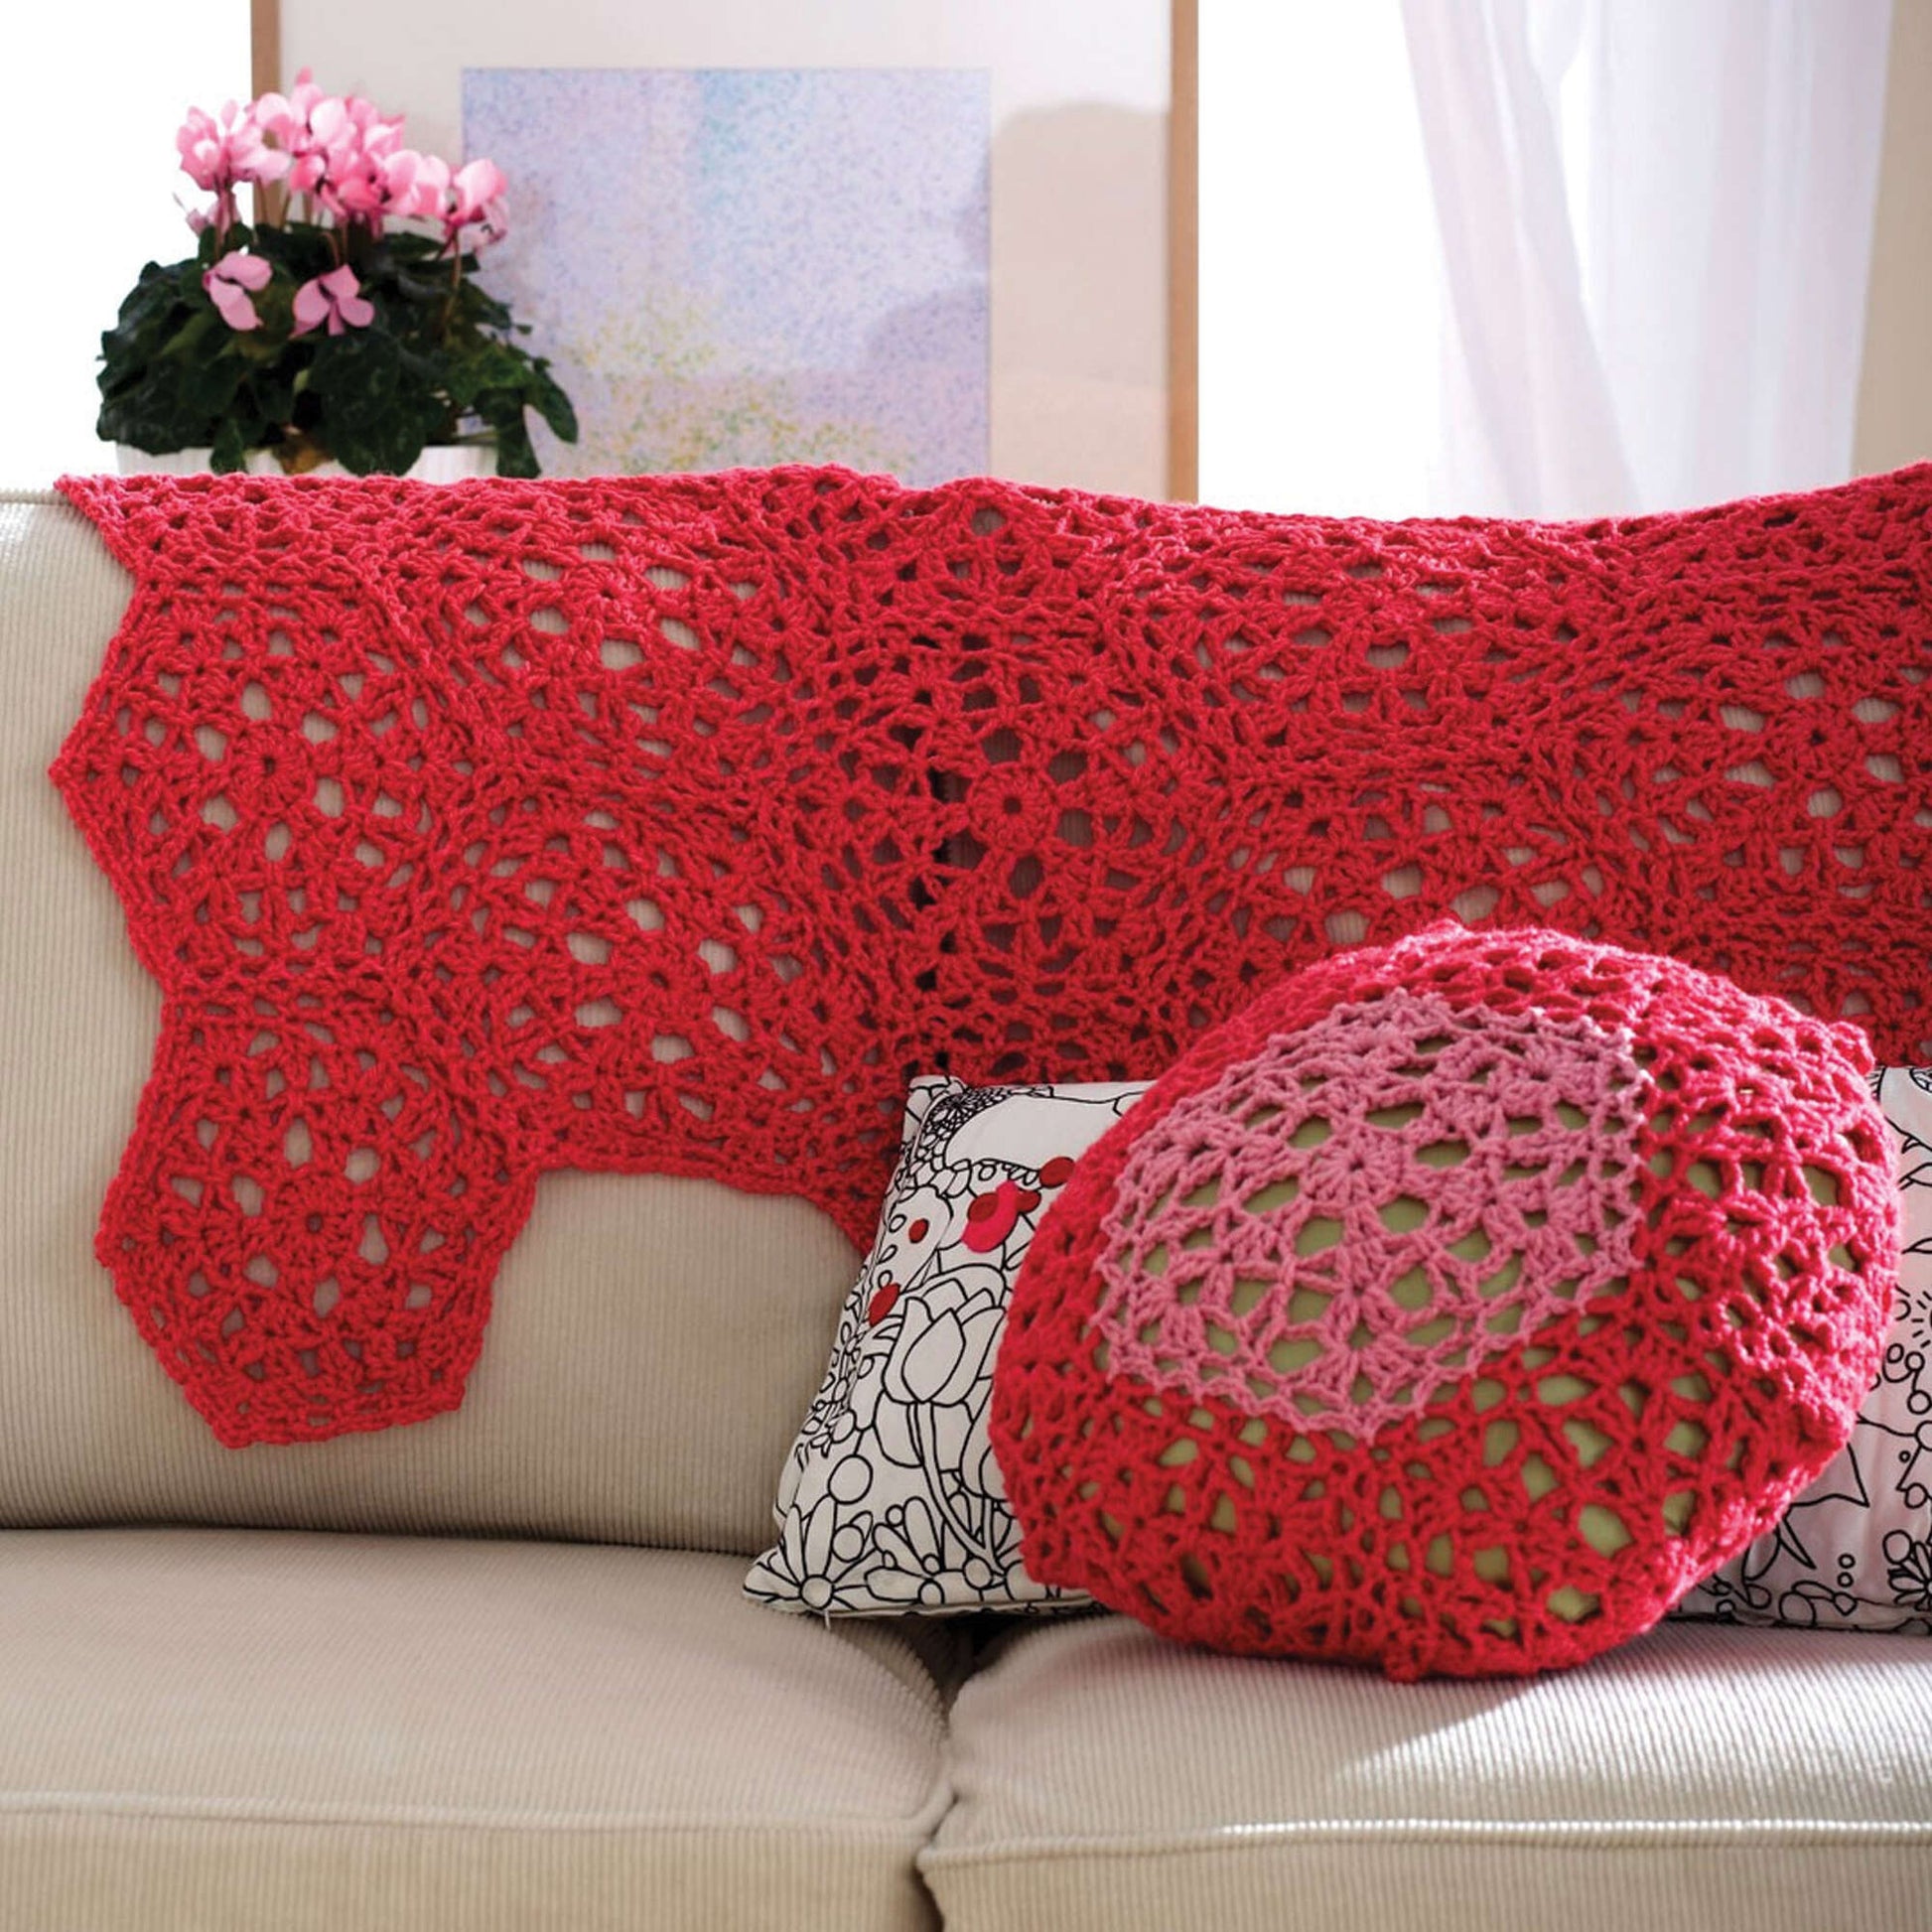 Free Patons Crochet Cranberry Mousse Throw & Cushion Pattern